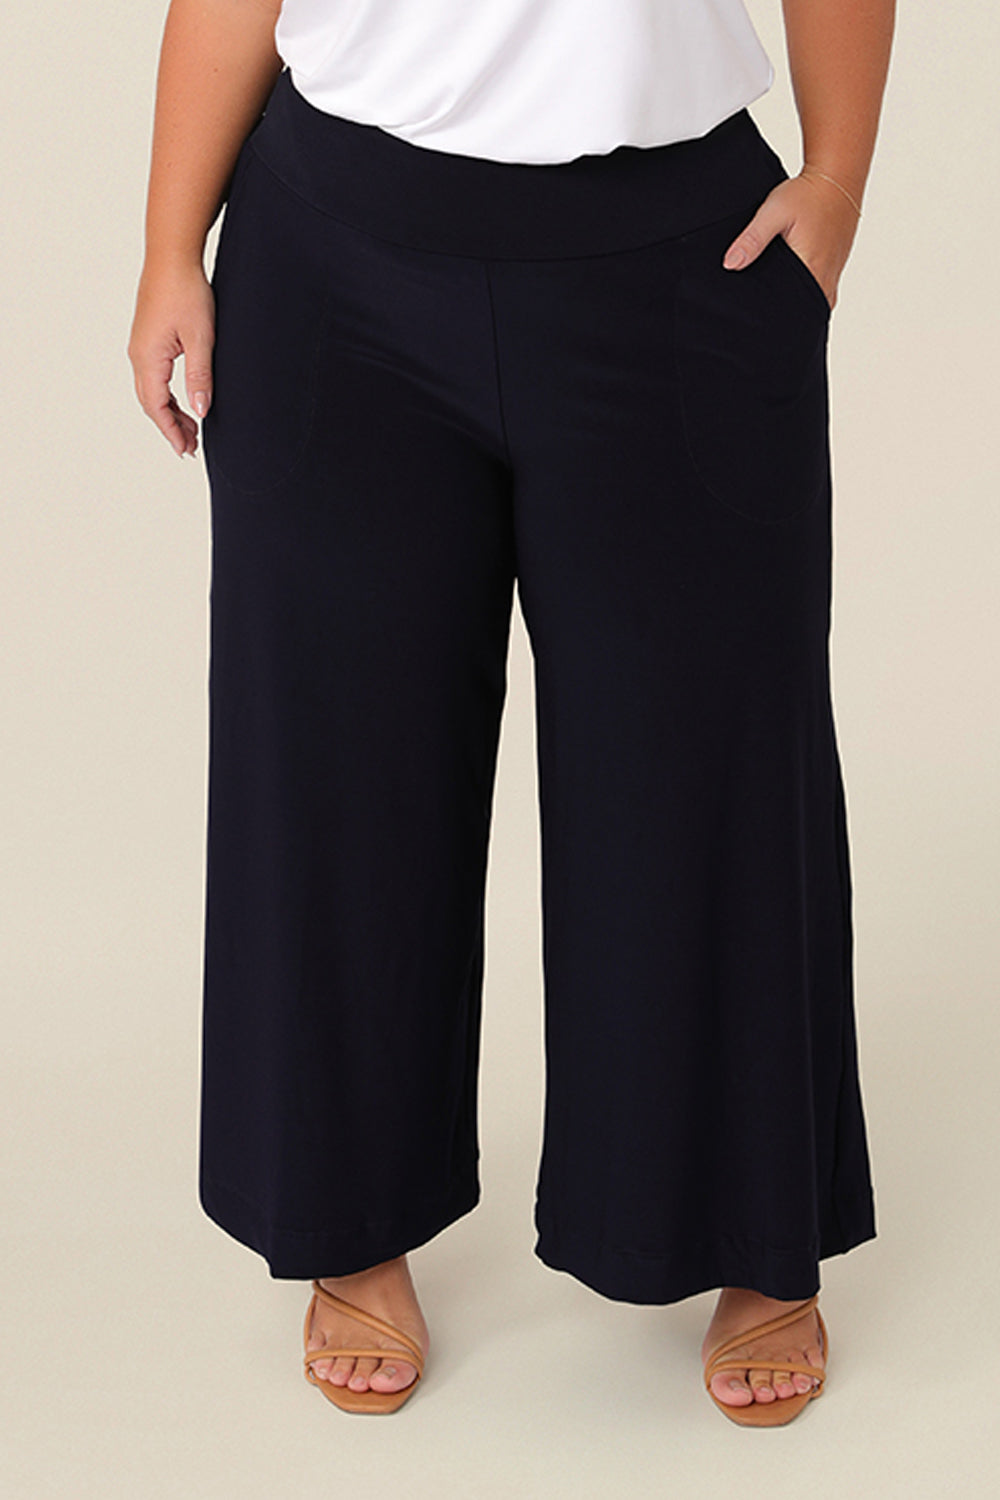 Good pants for petite women, black culotte pants by Australian fashion brand, Leina & Fleur, are shown on a curvy, size 16 woman. Cropped trousers with a stretchy, pull on waistband, these easy-care wide leg pants are worn with a short sleeve top in white bamboo jersey.